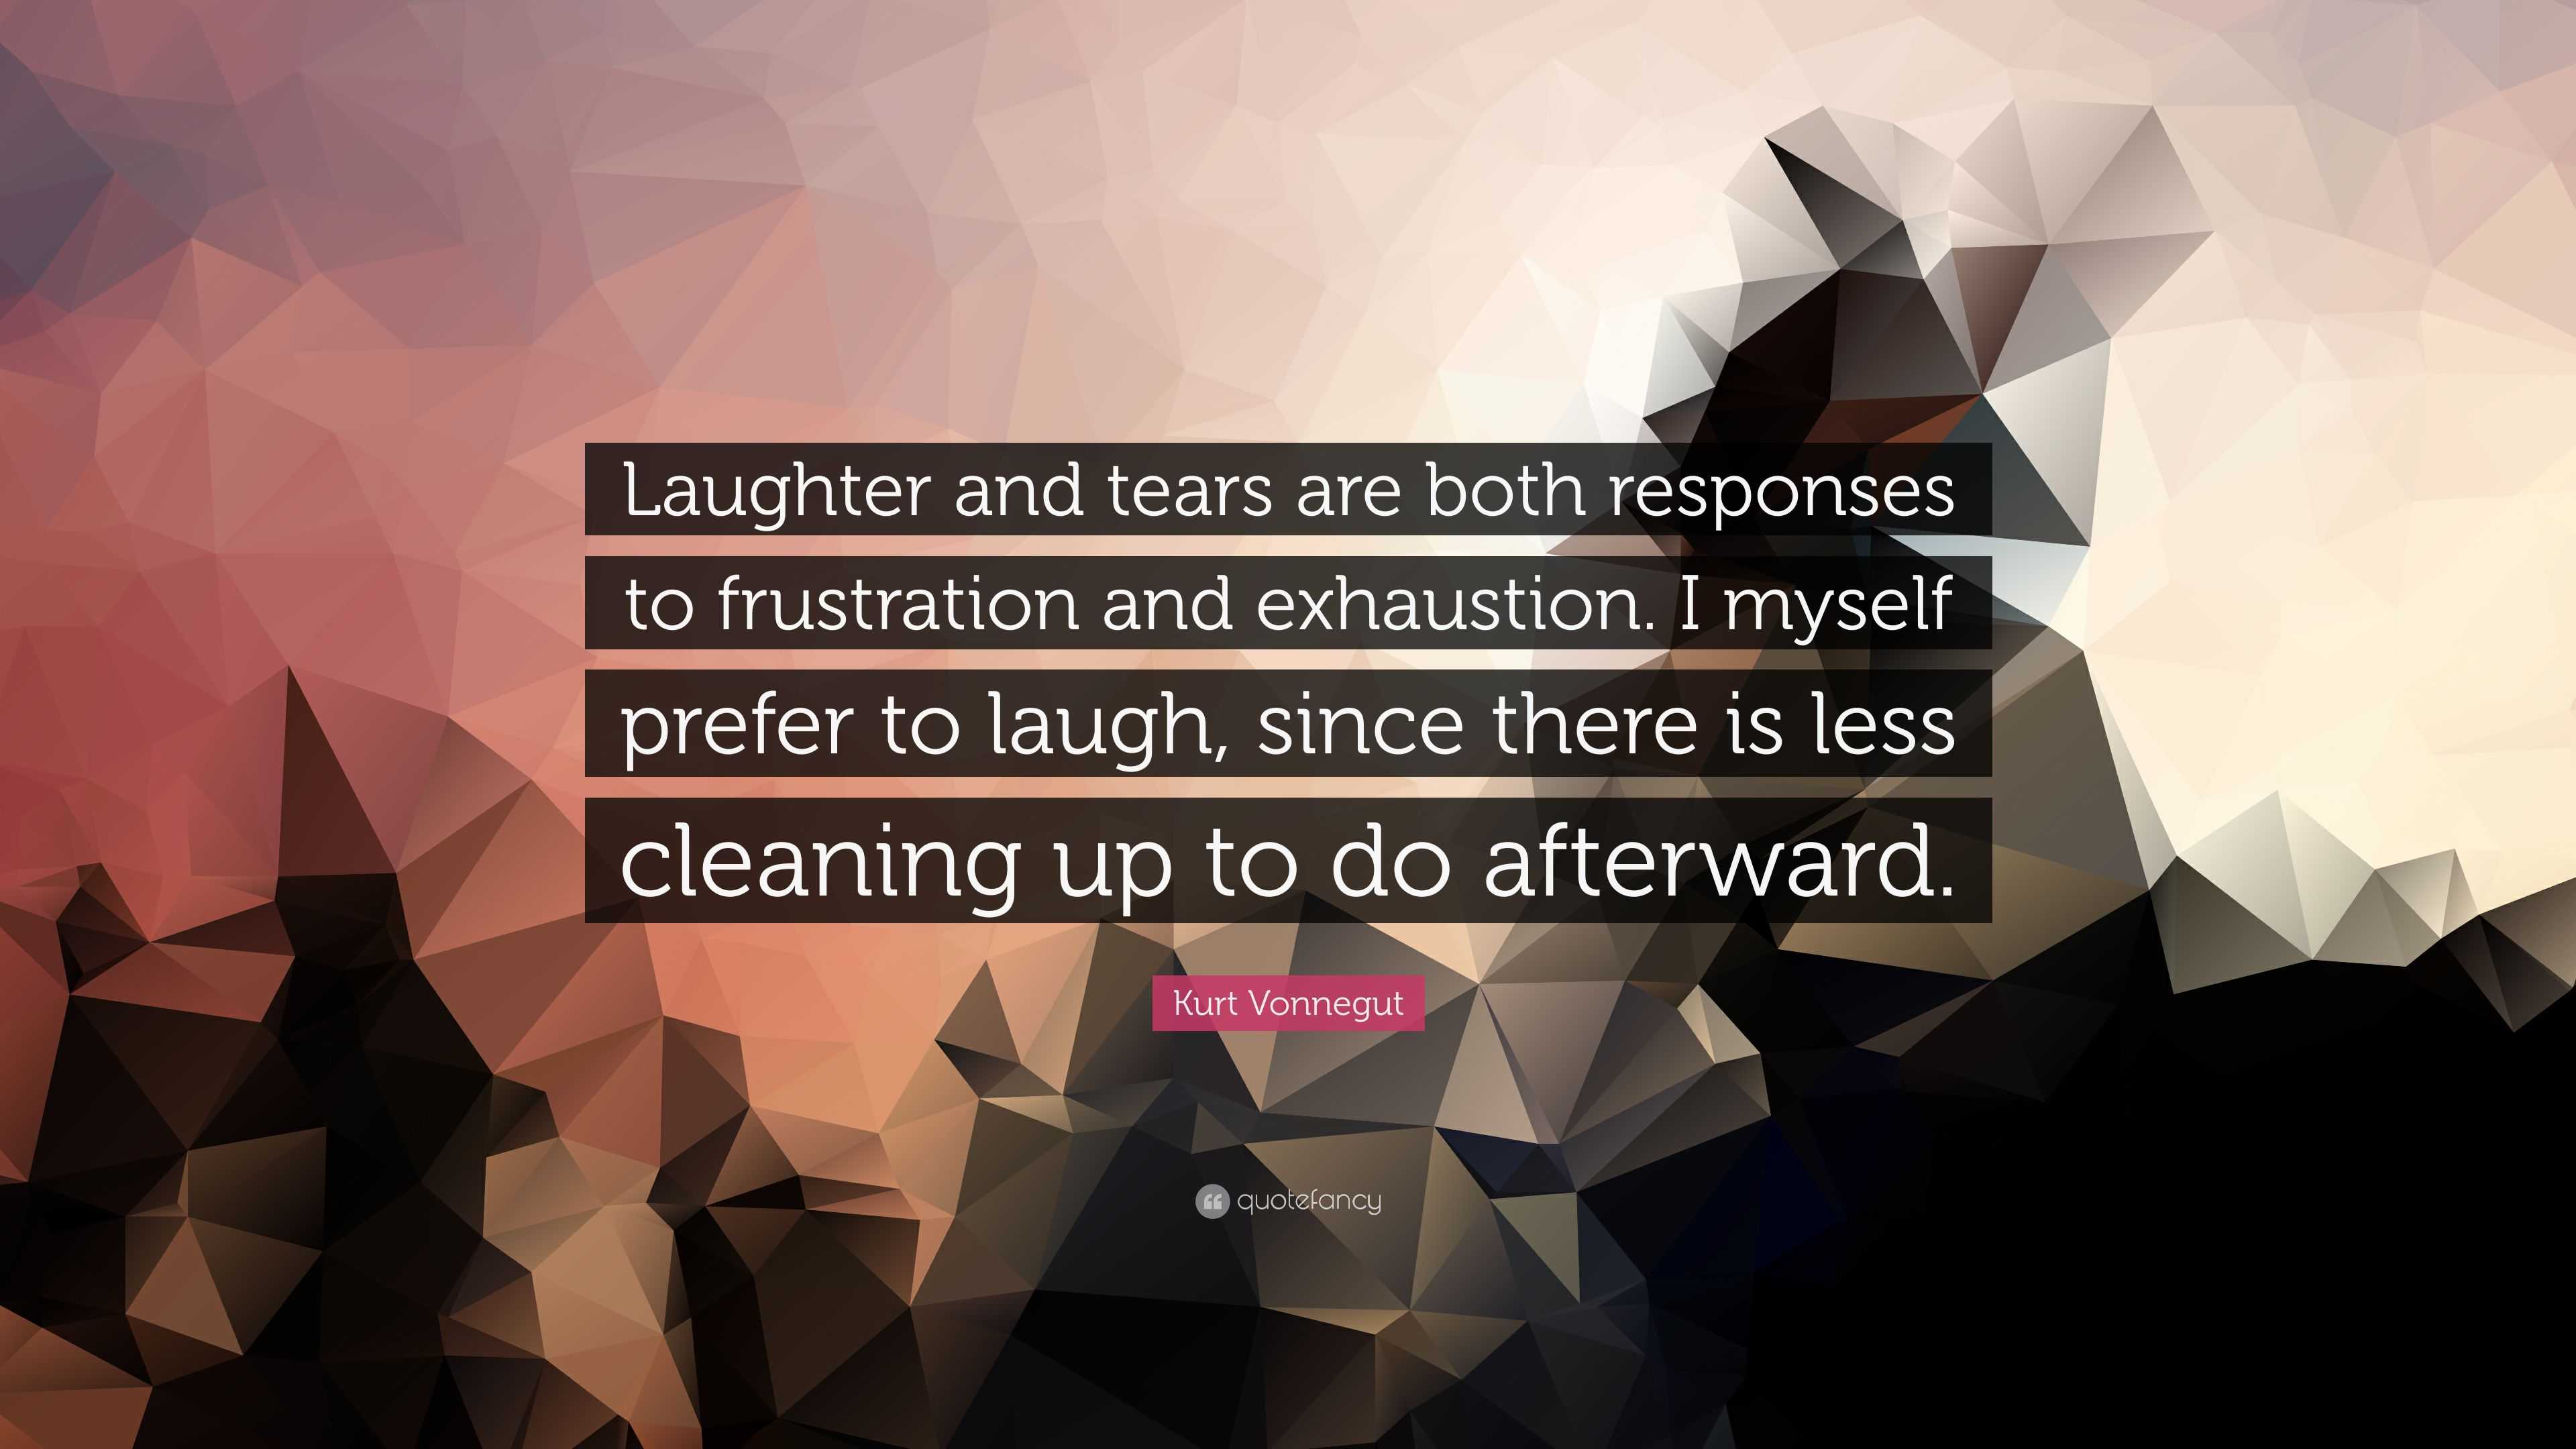 laughter quote images